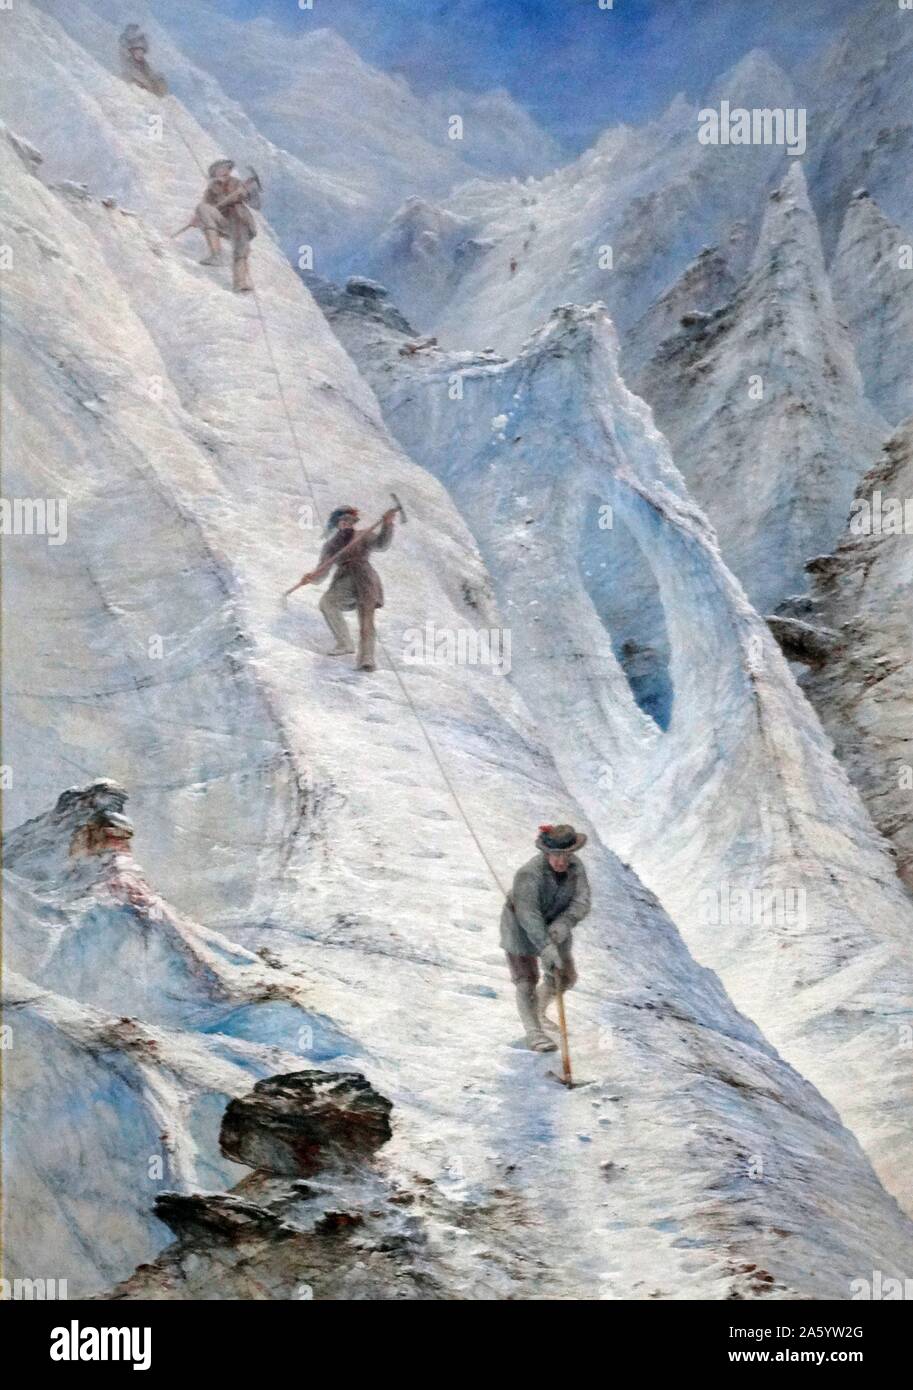 Alpine Climbers by Elijah Walton (1832-1880) English artist, best known for his landscapes of the Alps mountains. Dated 1869 Stock Photo